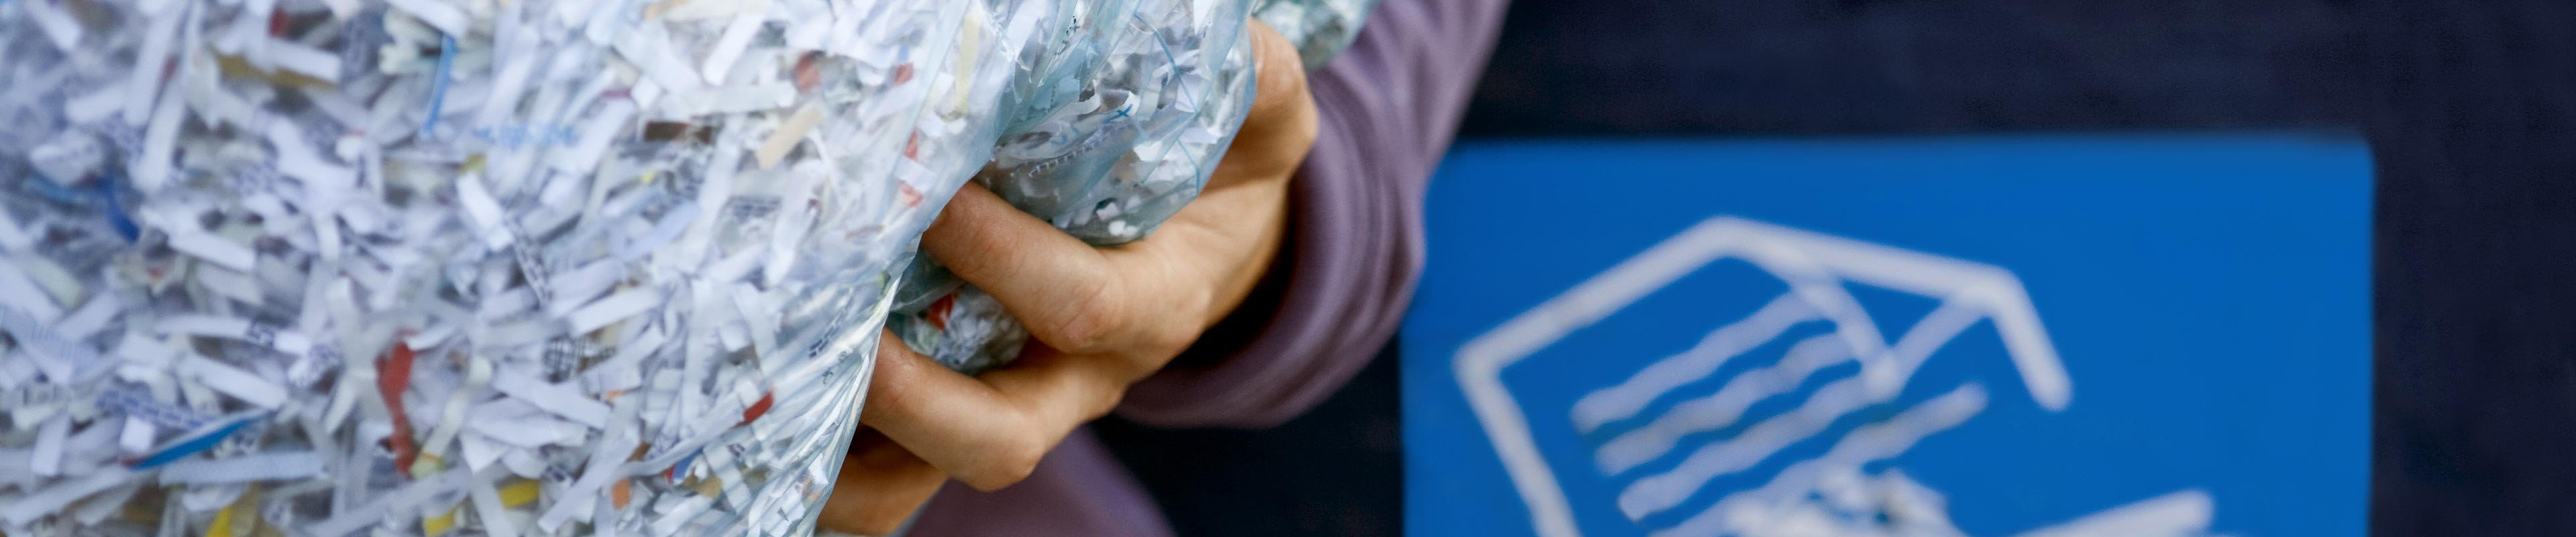 A person holding a bag of shredded documents in front of a shredded paper disposal bin.